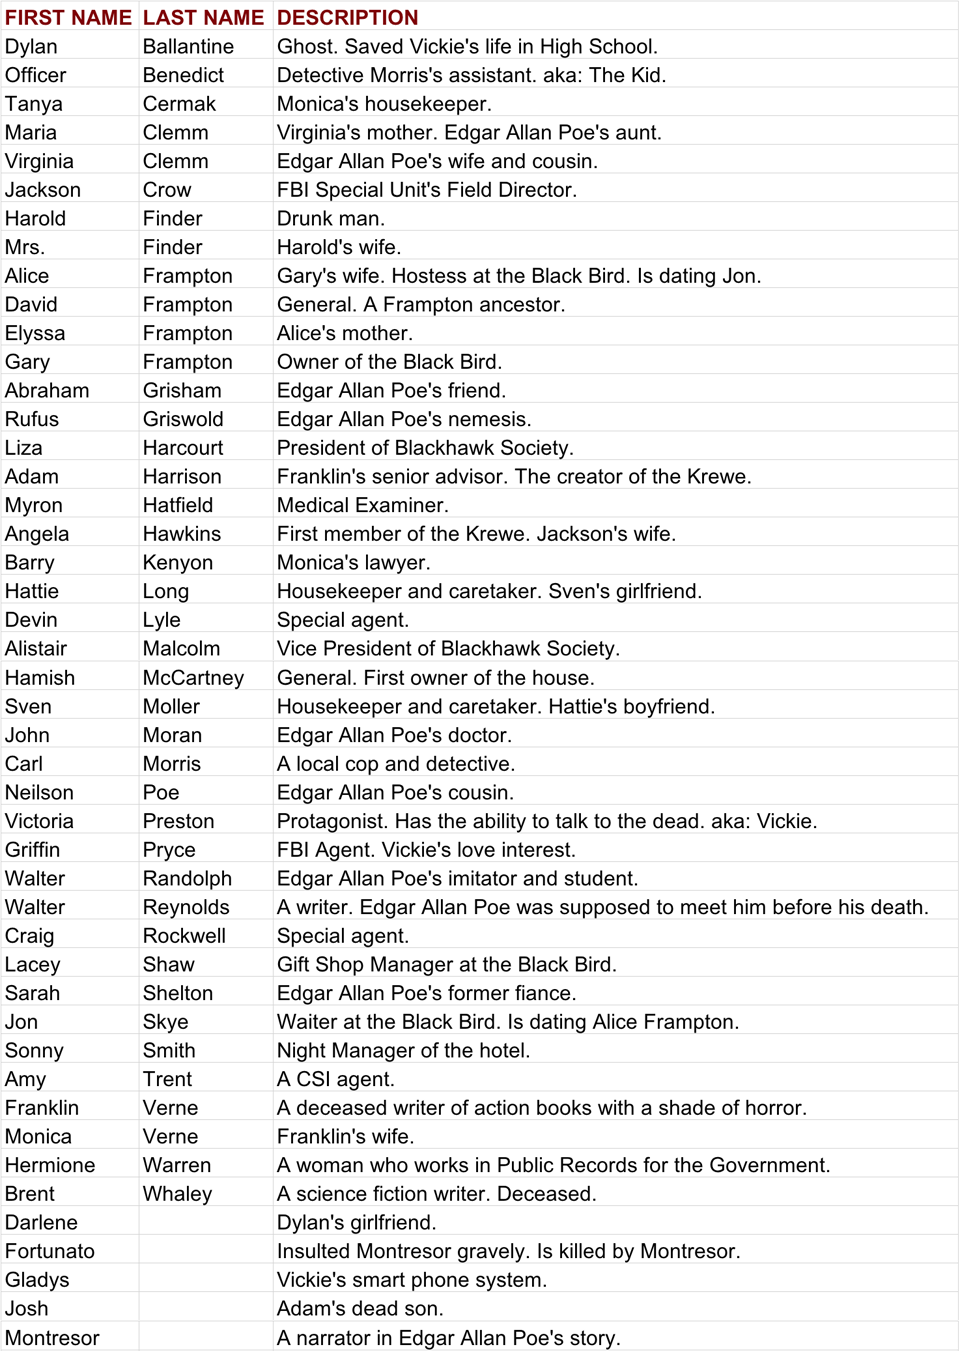 Wicked Deeds Characters Alphabetical List